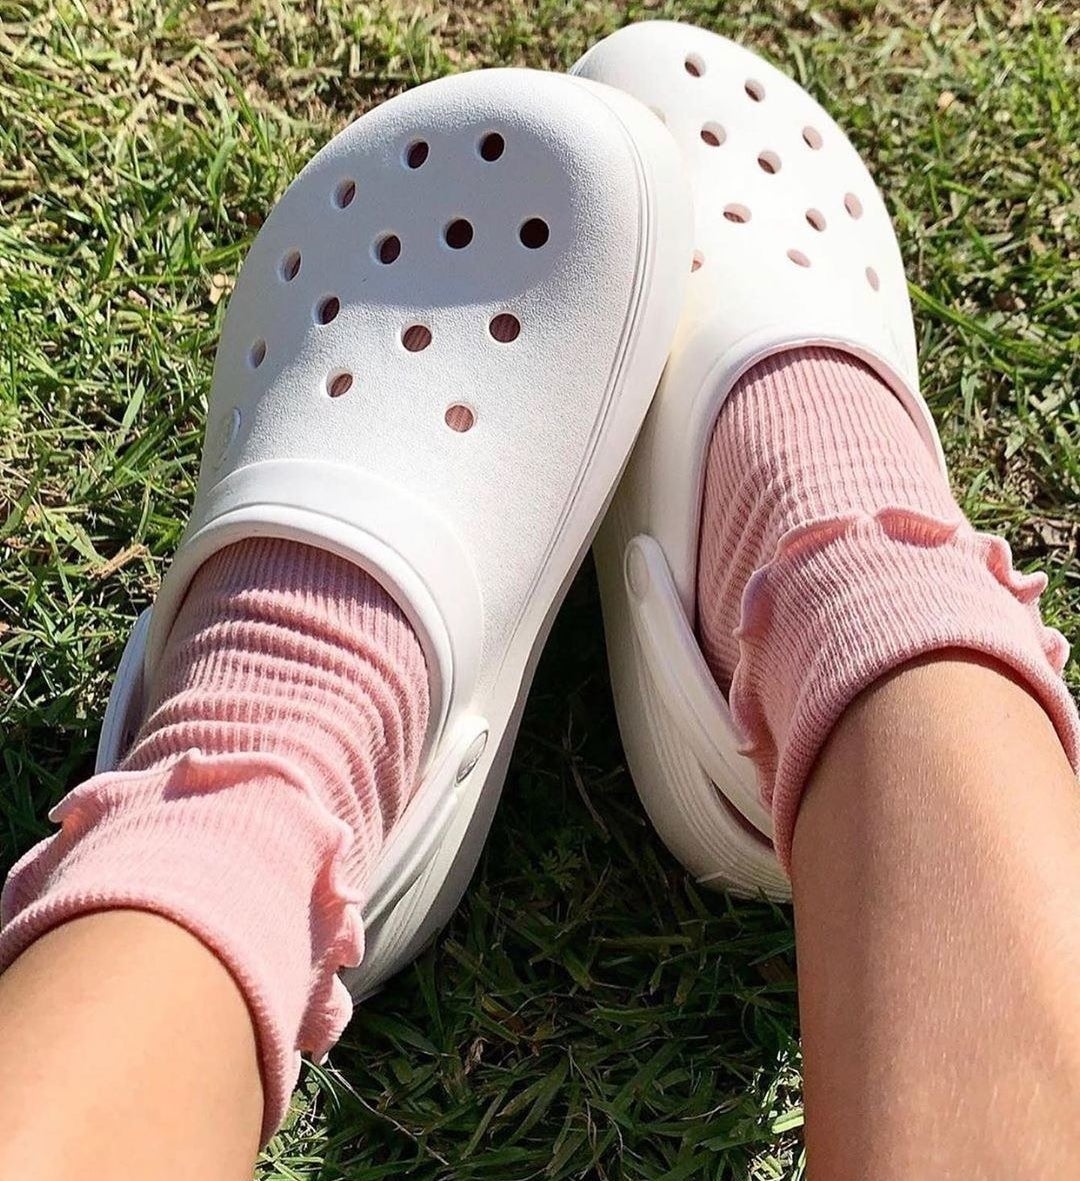 A person wearing Crocs with socks